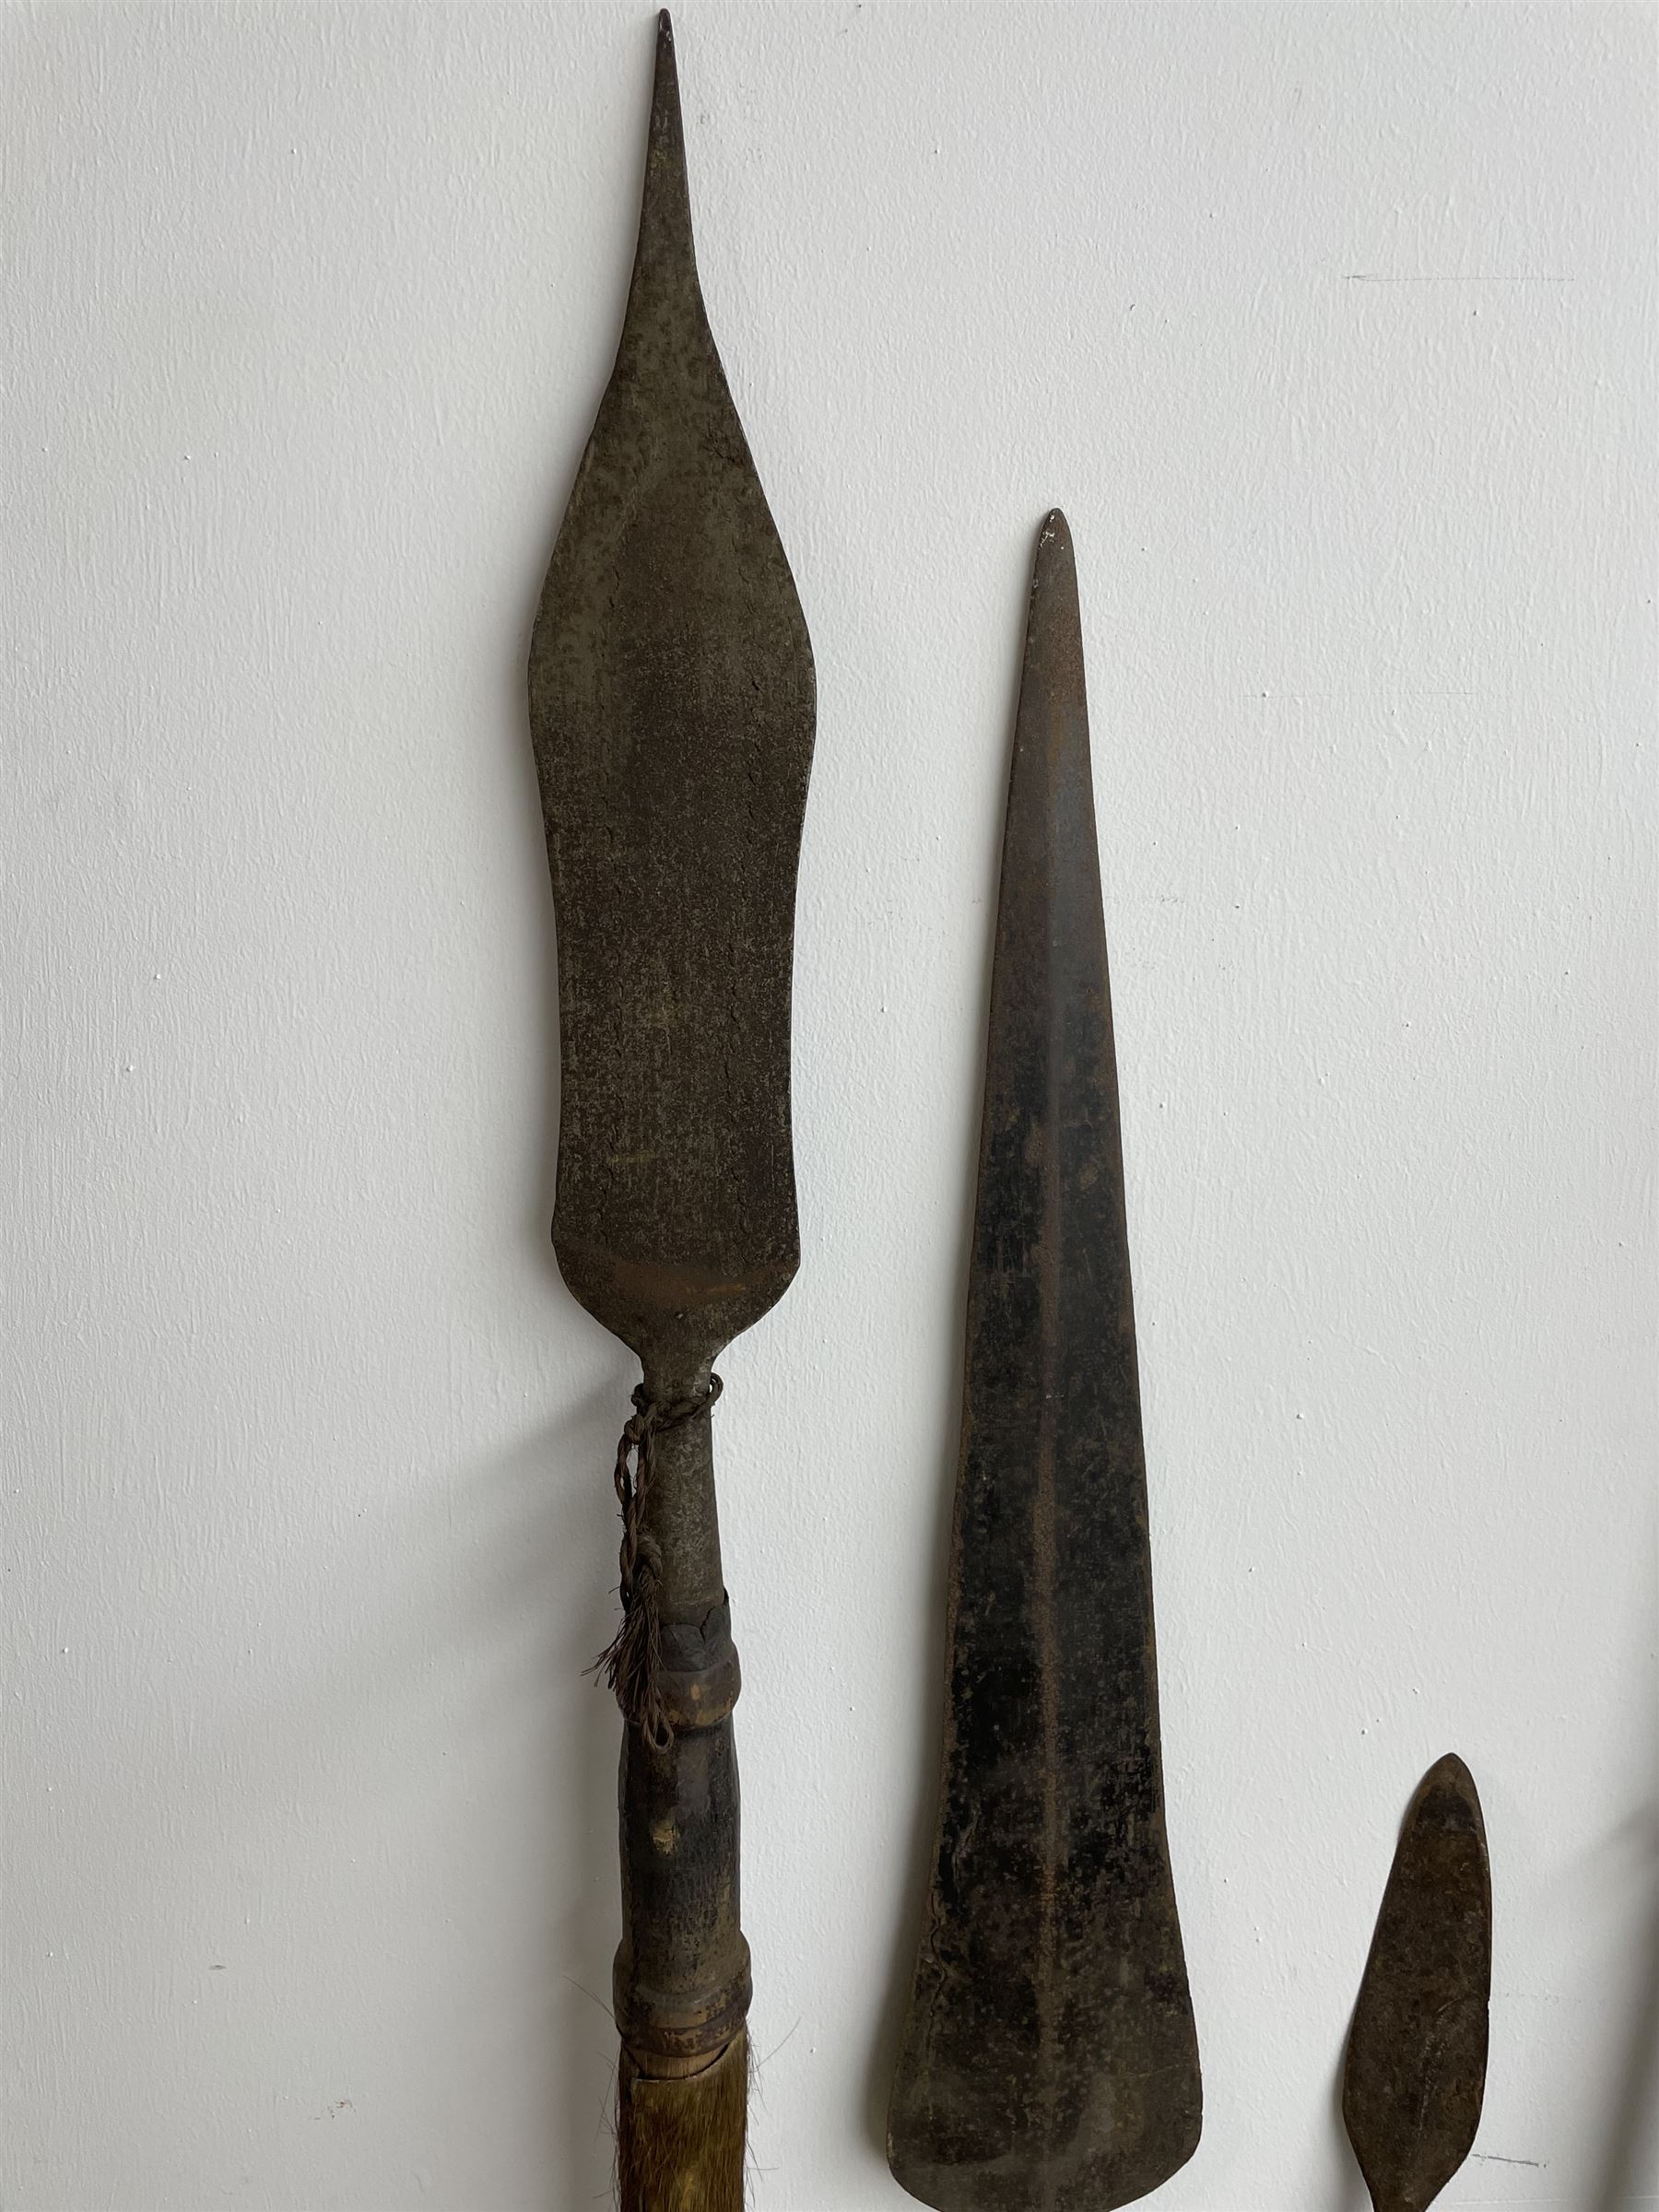 Pair of African carved wooden paddle clubs - Image 11 of 15